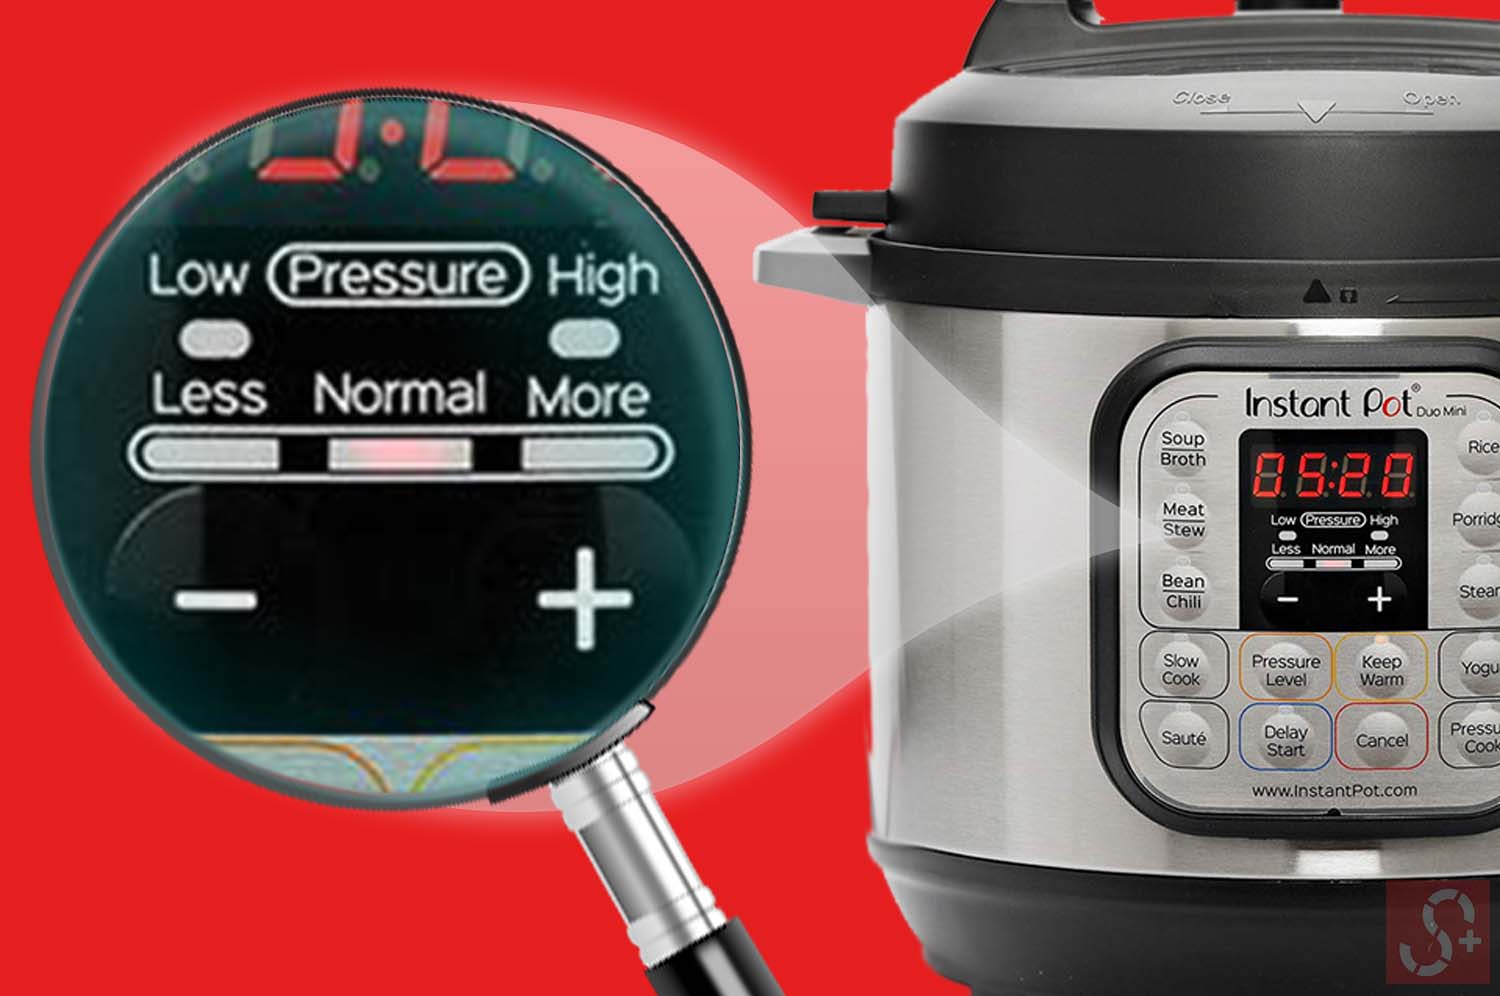 https://simplelifesaver.com/wp-content/uploads/2020/03/Magnifying-glass-showing-the-Less-Normal-More-Buttons-on-the-Instant-pot.jpg